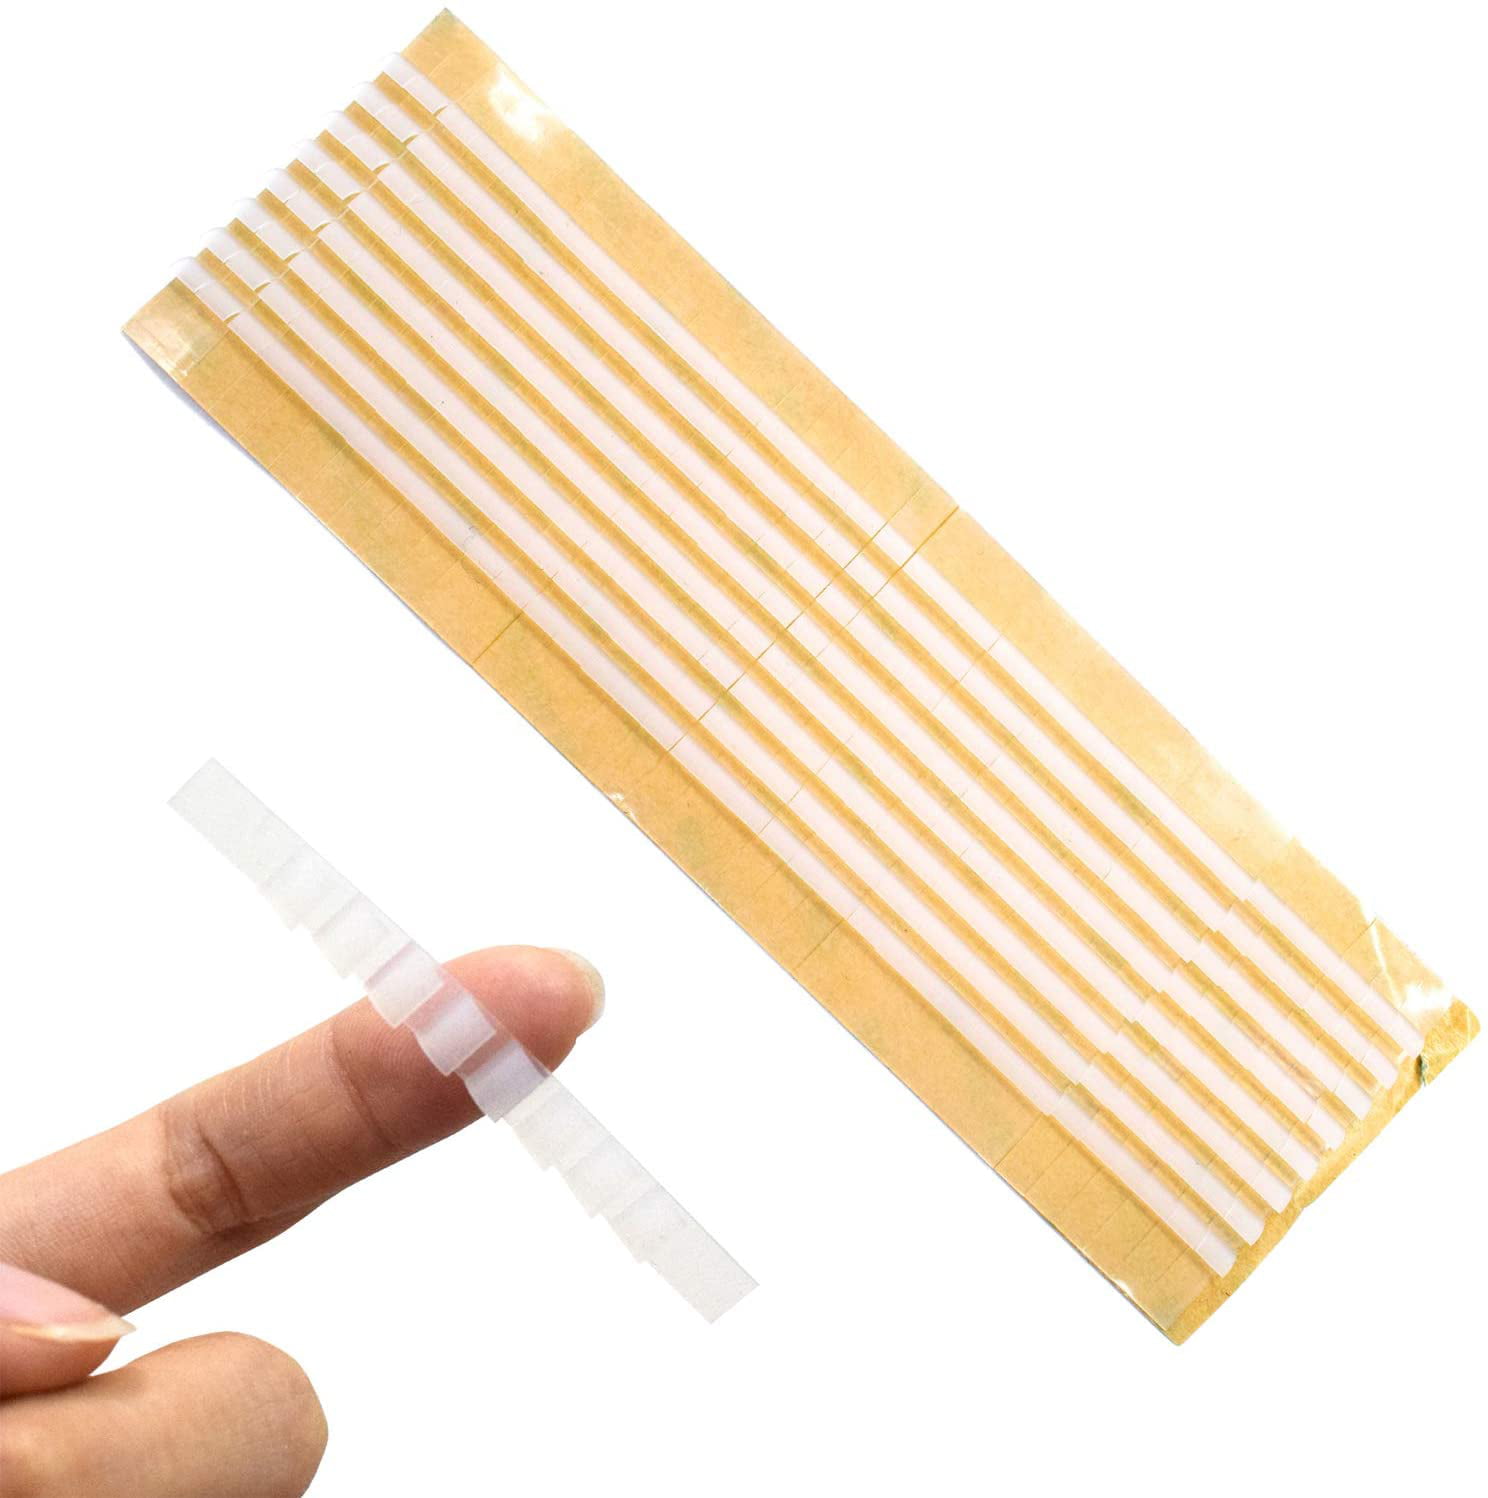 WarmSky 100pcs Clear Self Adhesive Non-Slip Rubber Clothes Hanger Grips Clothing Hanger Strips